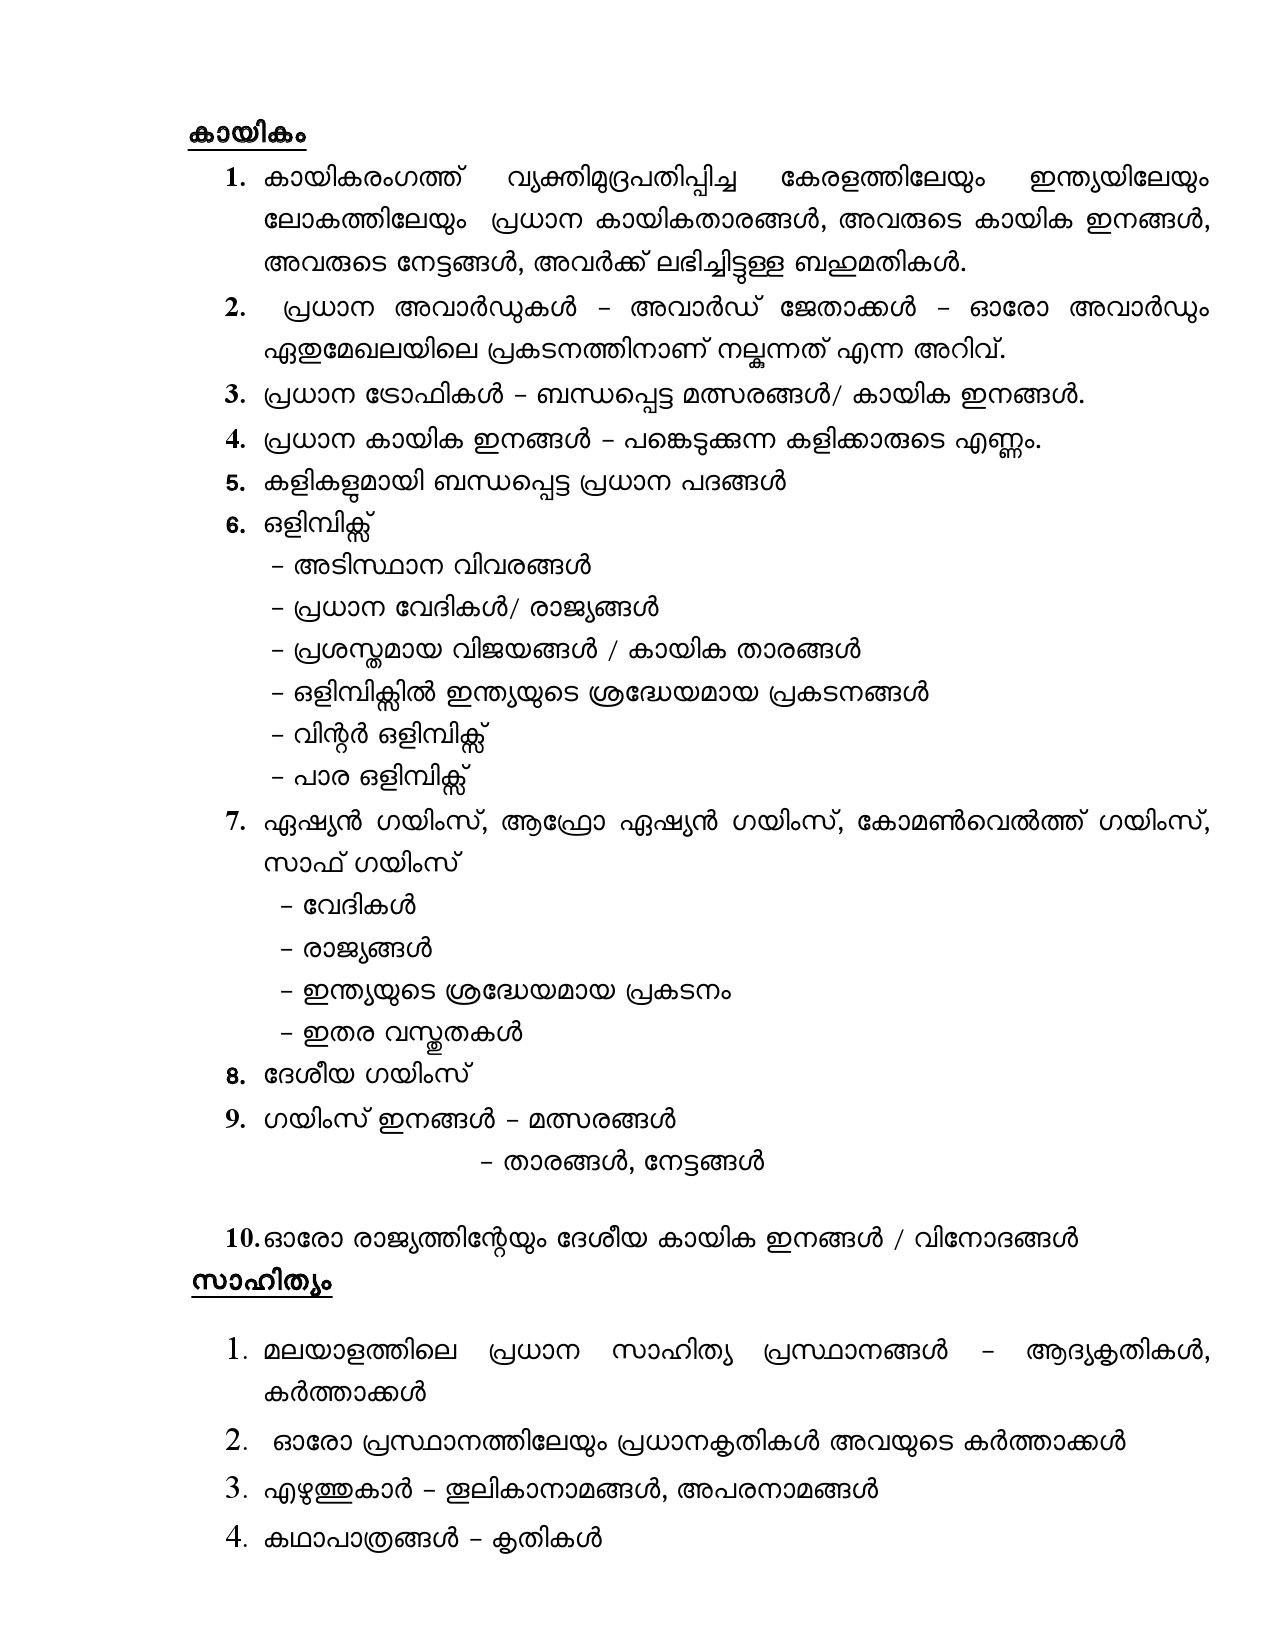 Beat Forest Officer Final Examination Syllabus For Plus Two Level - Notification Image 6